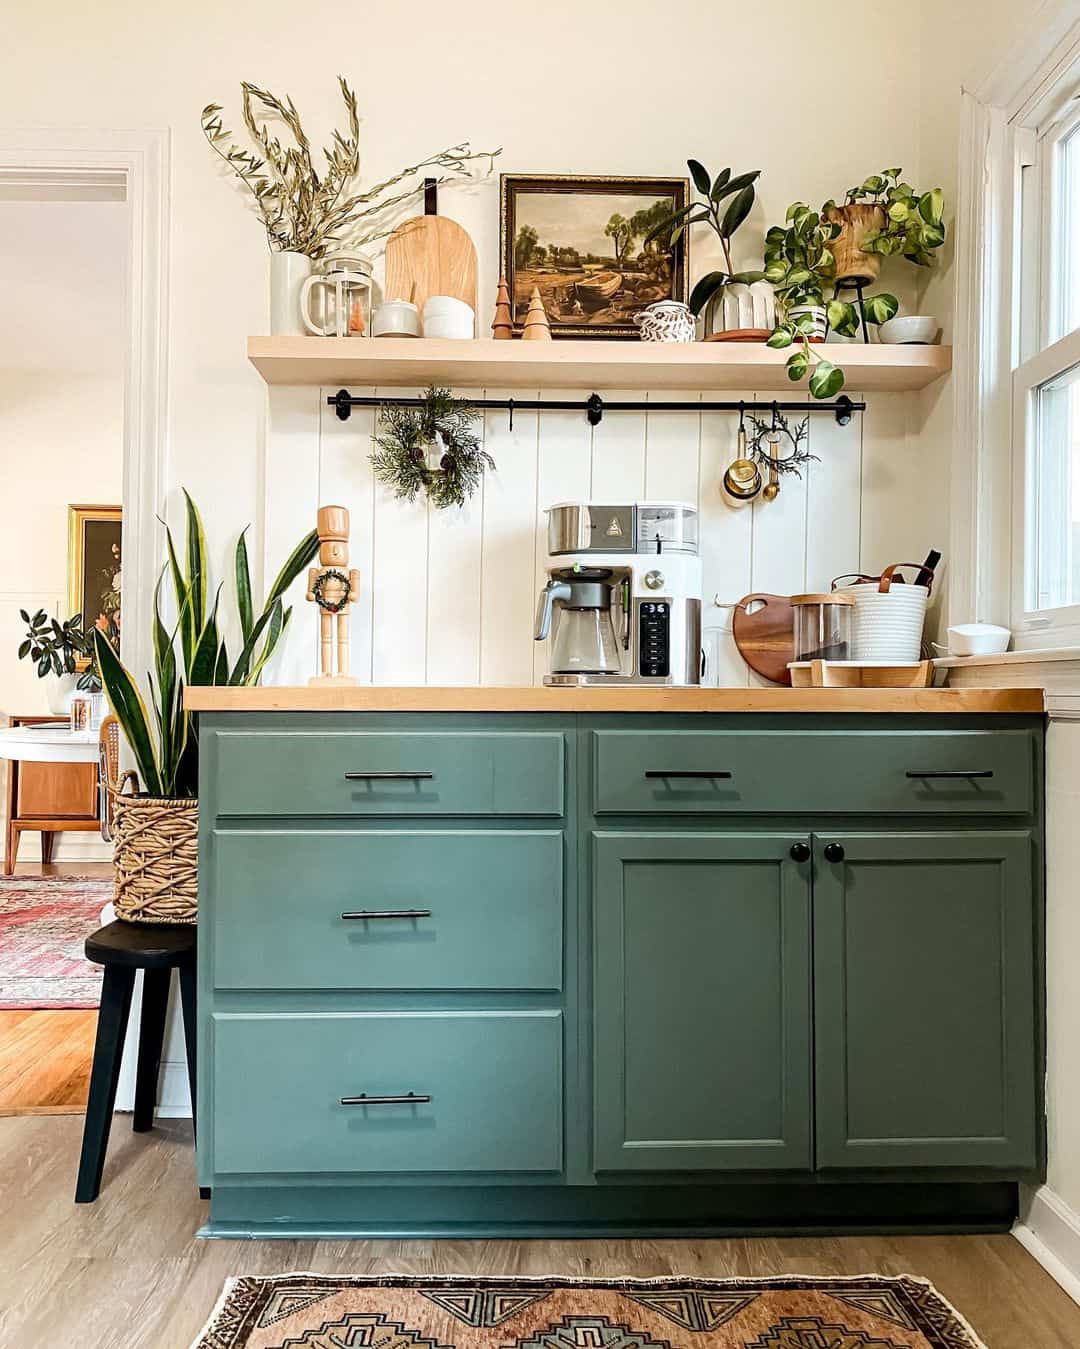 20 Useful Sage Green Kitchen Cabinets for Your Next Reno